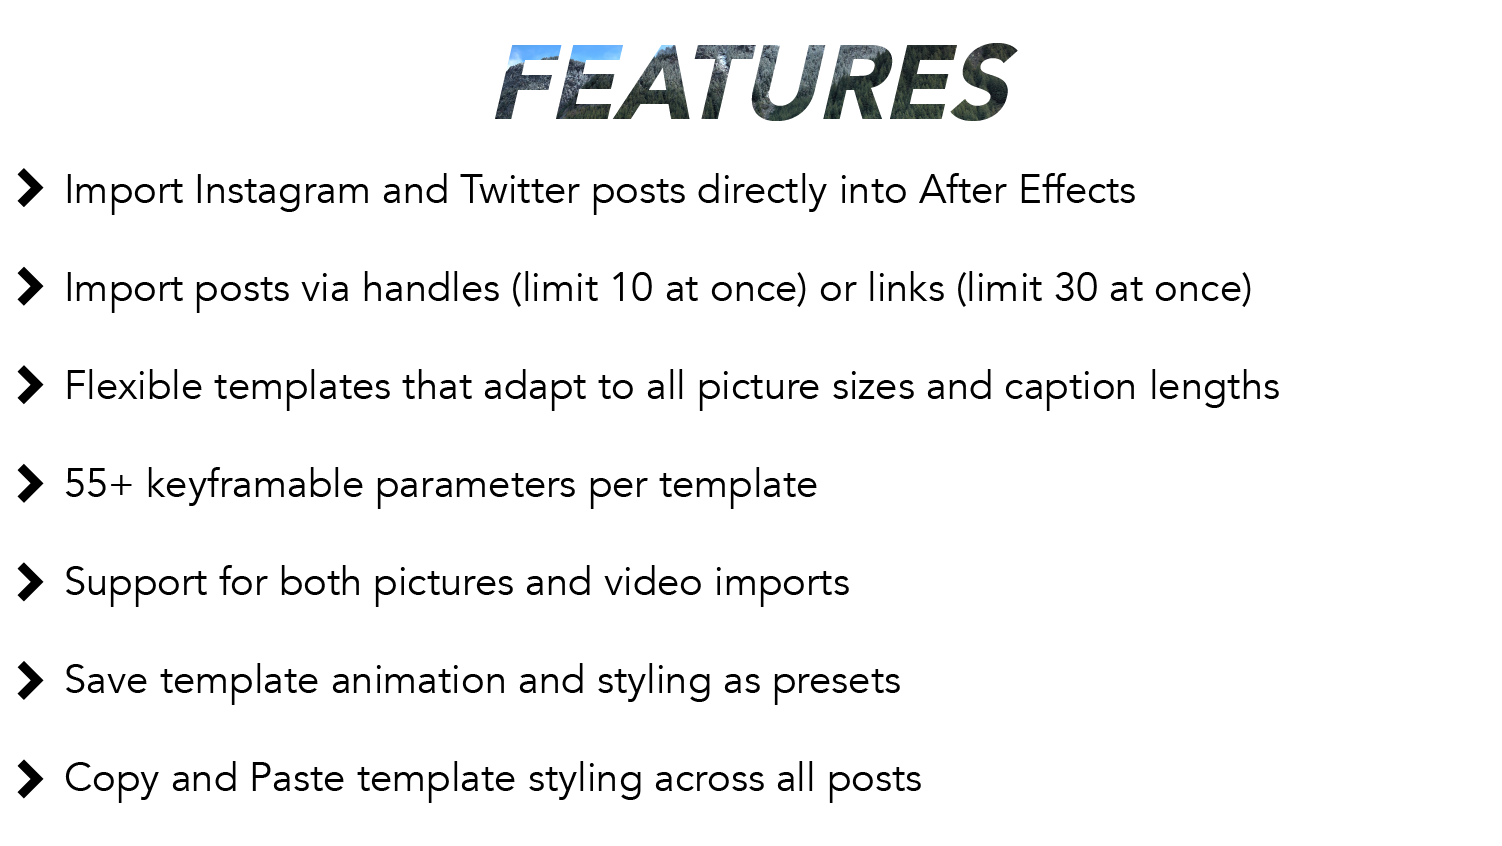 Features: Import Instagram and Twitter posts directly into After Effects. Import posts via handles (limit 10 at once) or links (limit 30 at once). Flexible templates that adapt to all picture sizes and caption lengths. 55+ keyframable parameters per template. Support for both pictures and video imports. Save template animation and styling as presets. Copy and paste template styling across all posts.